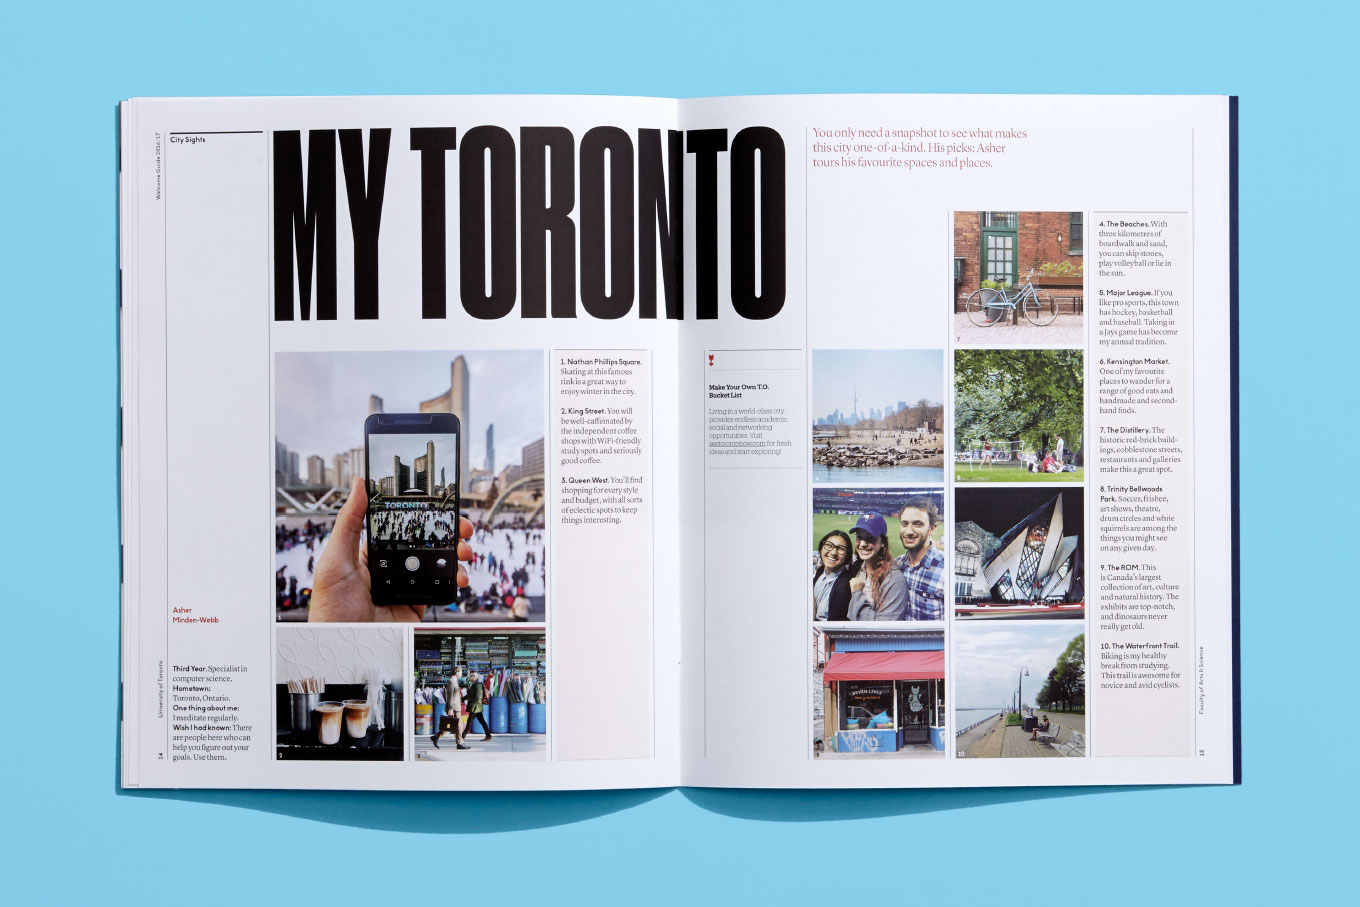 Spread of The Faculty of Arts & Science at University of Toronto viewbook